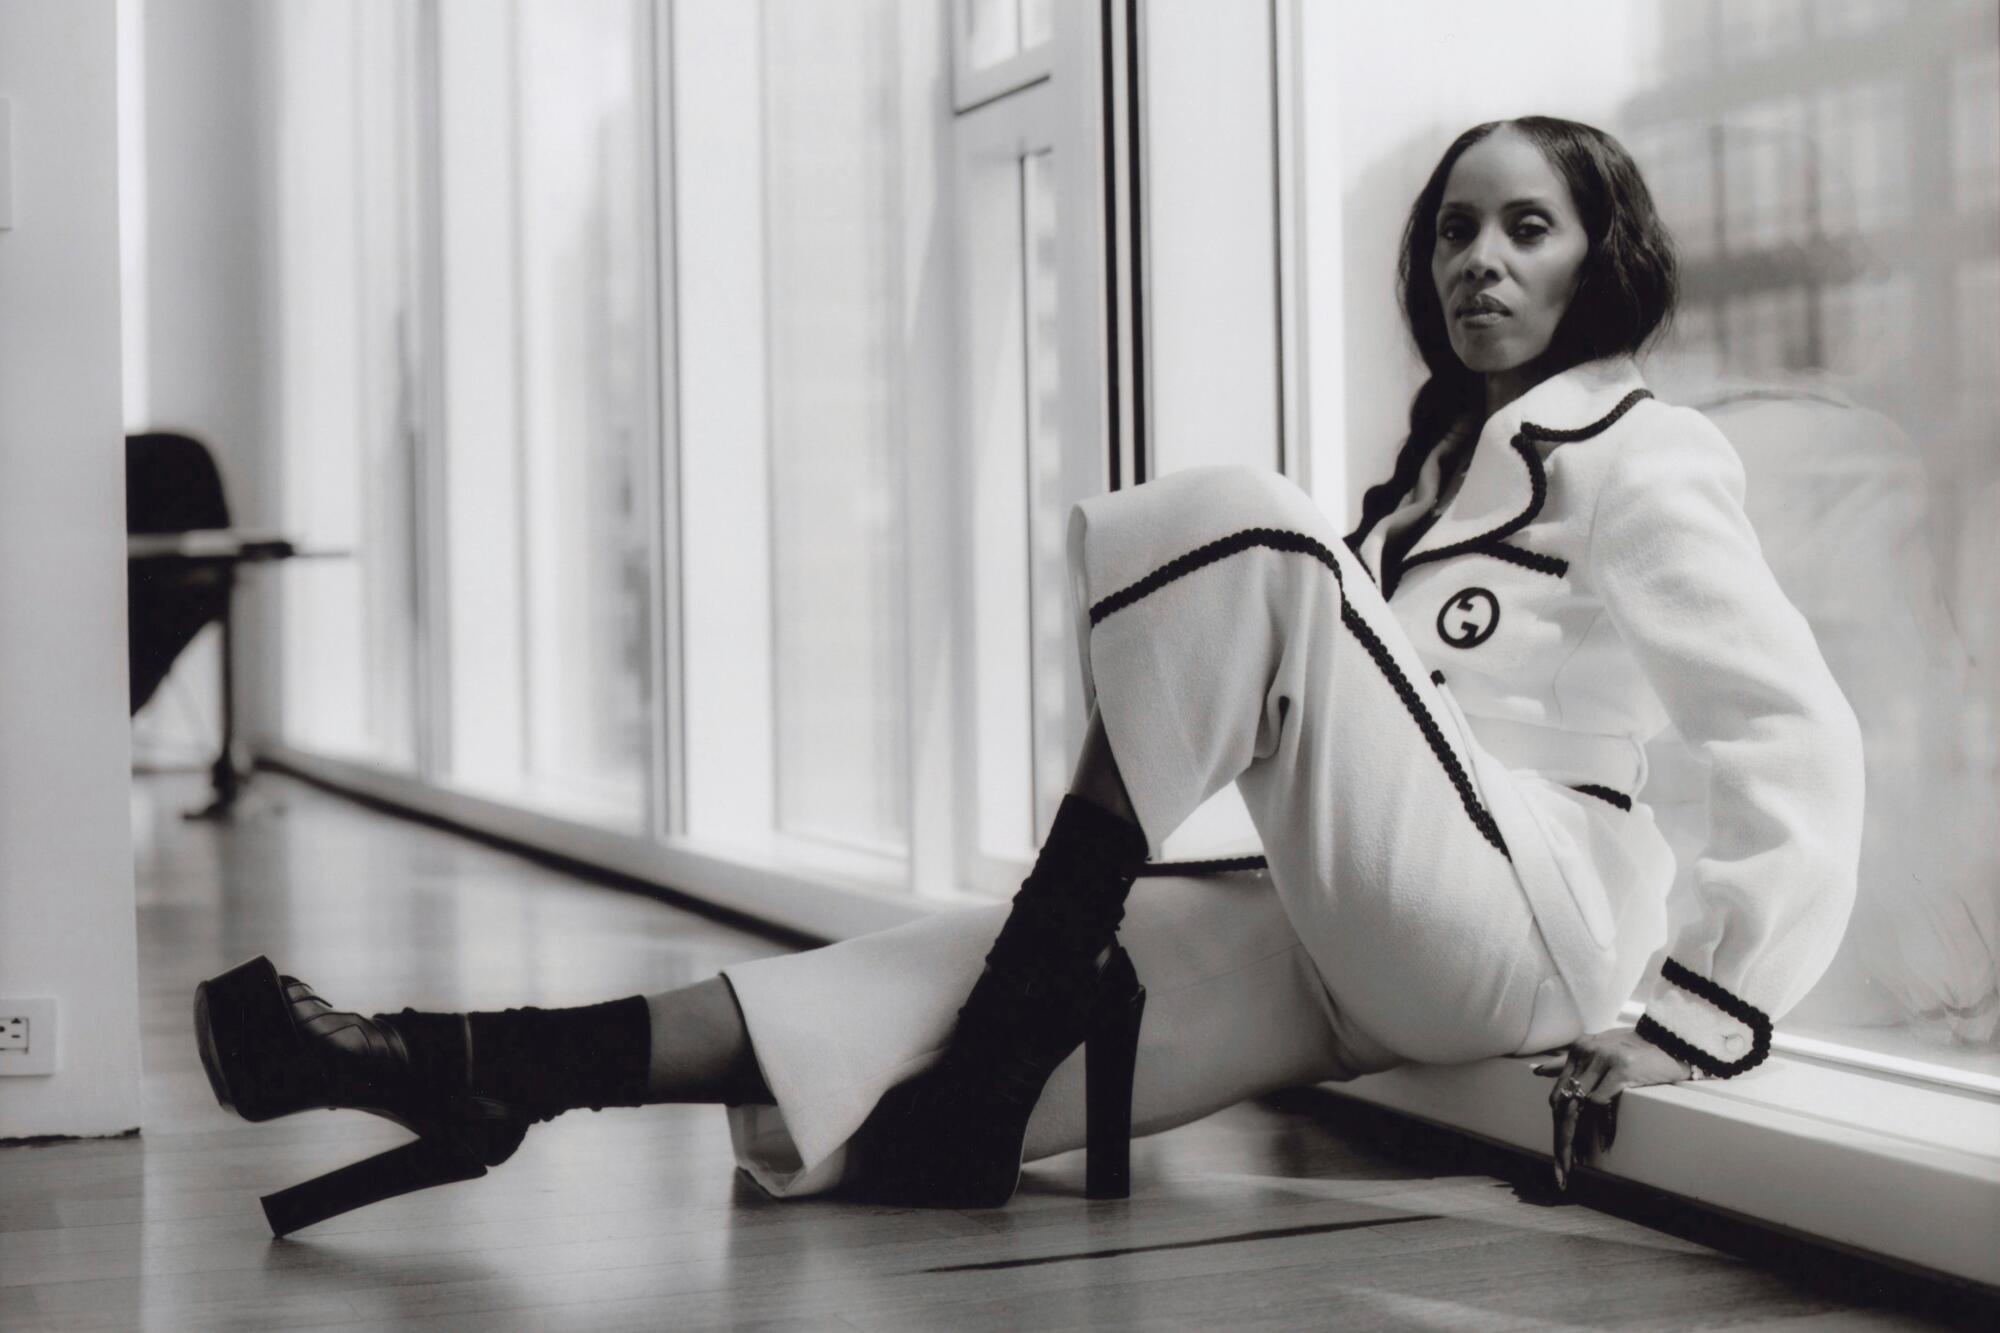 June Ambrose, sitting on the floor of an apartment, wears a white suit and black boots.